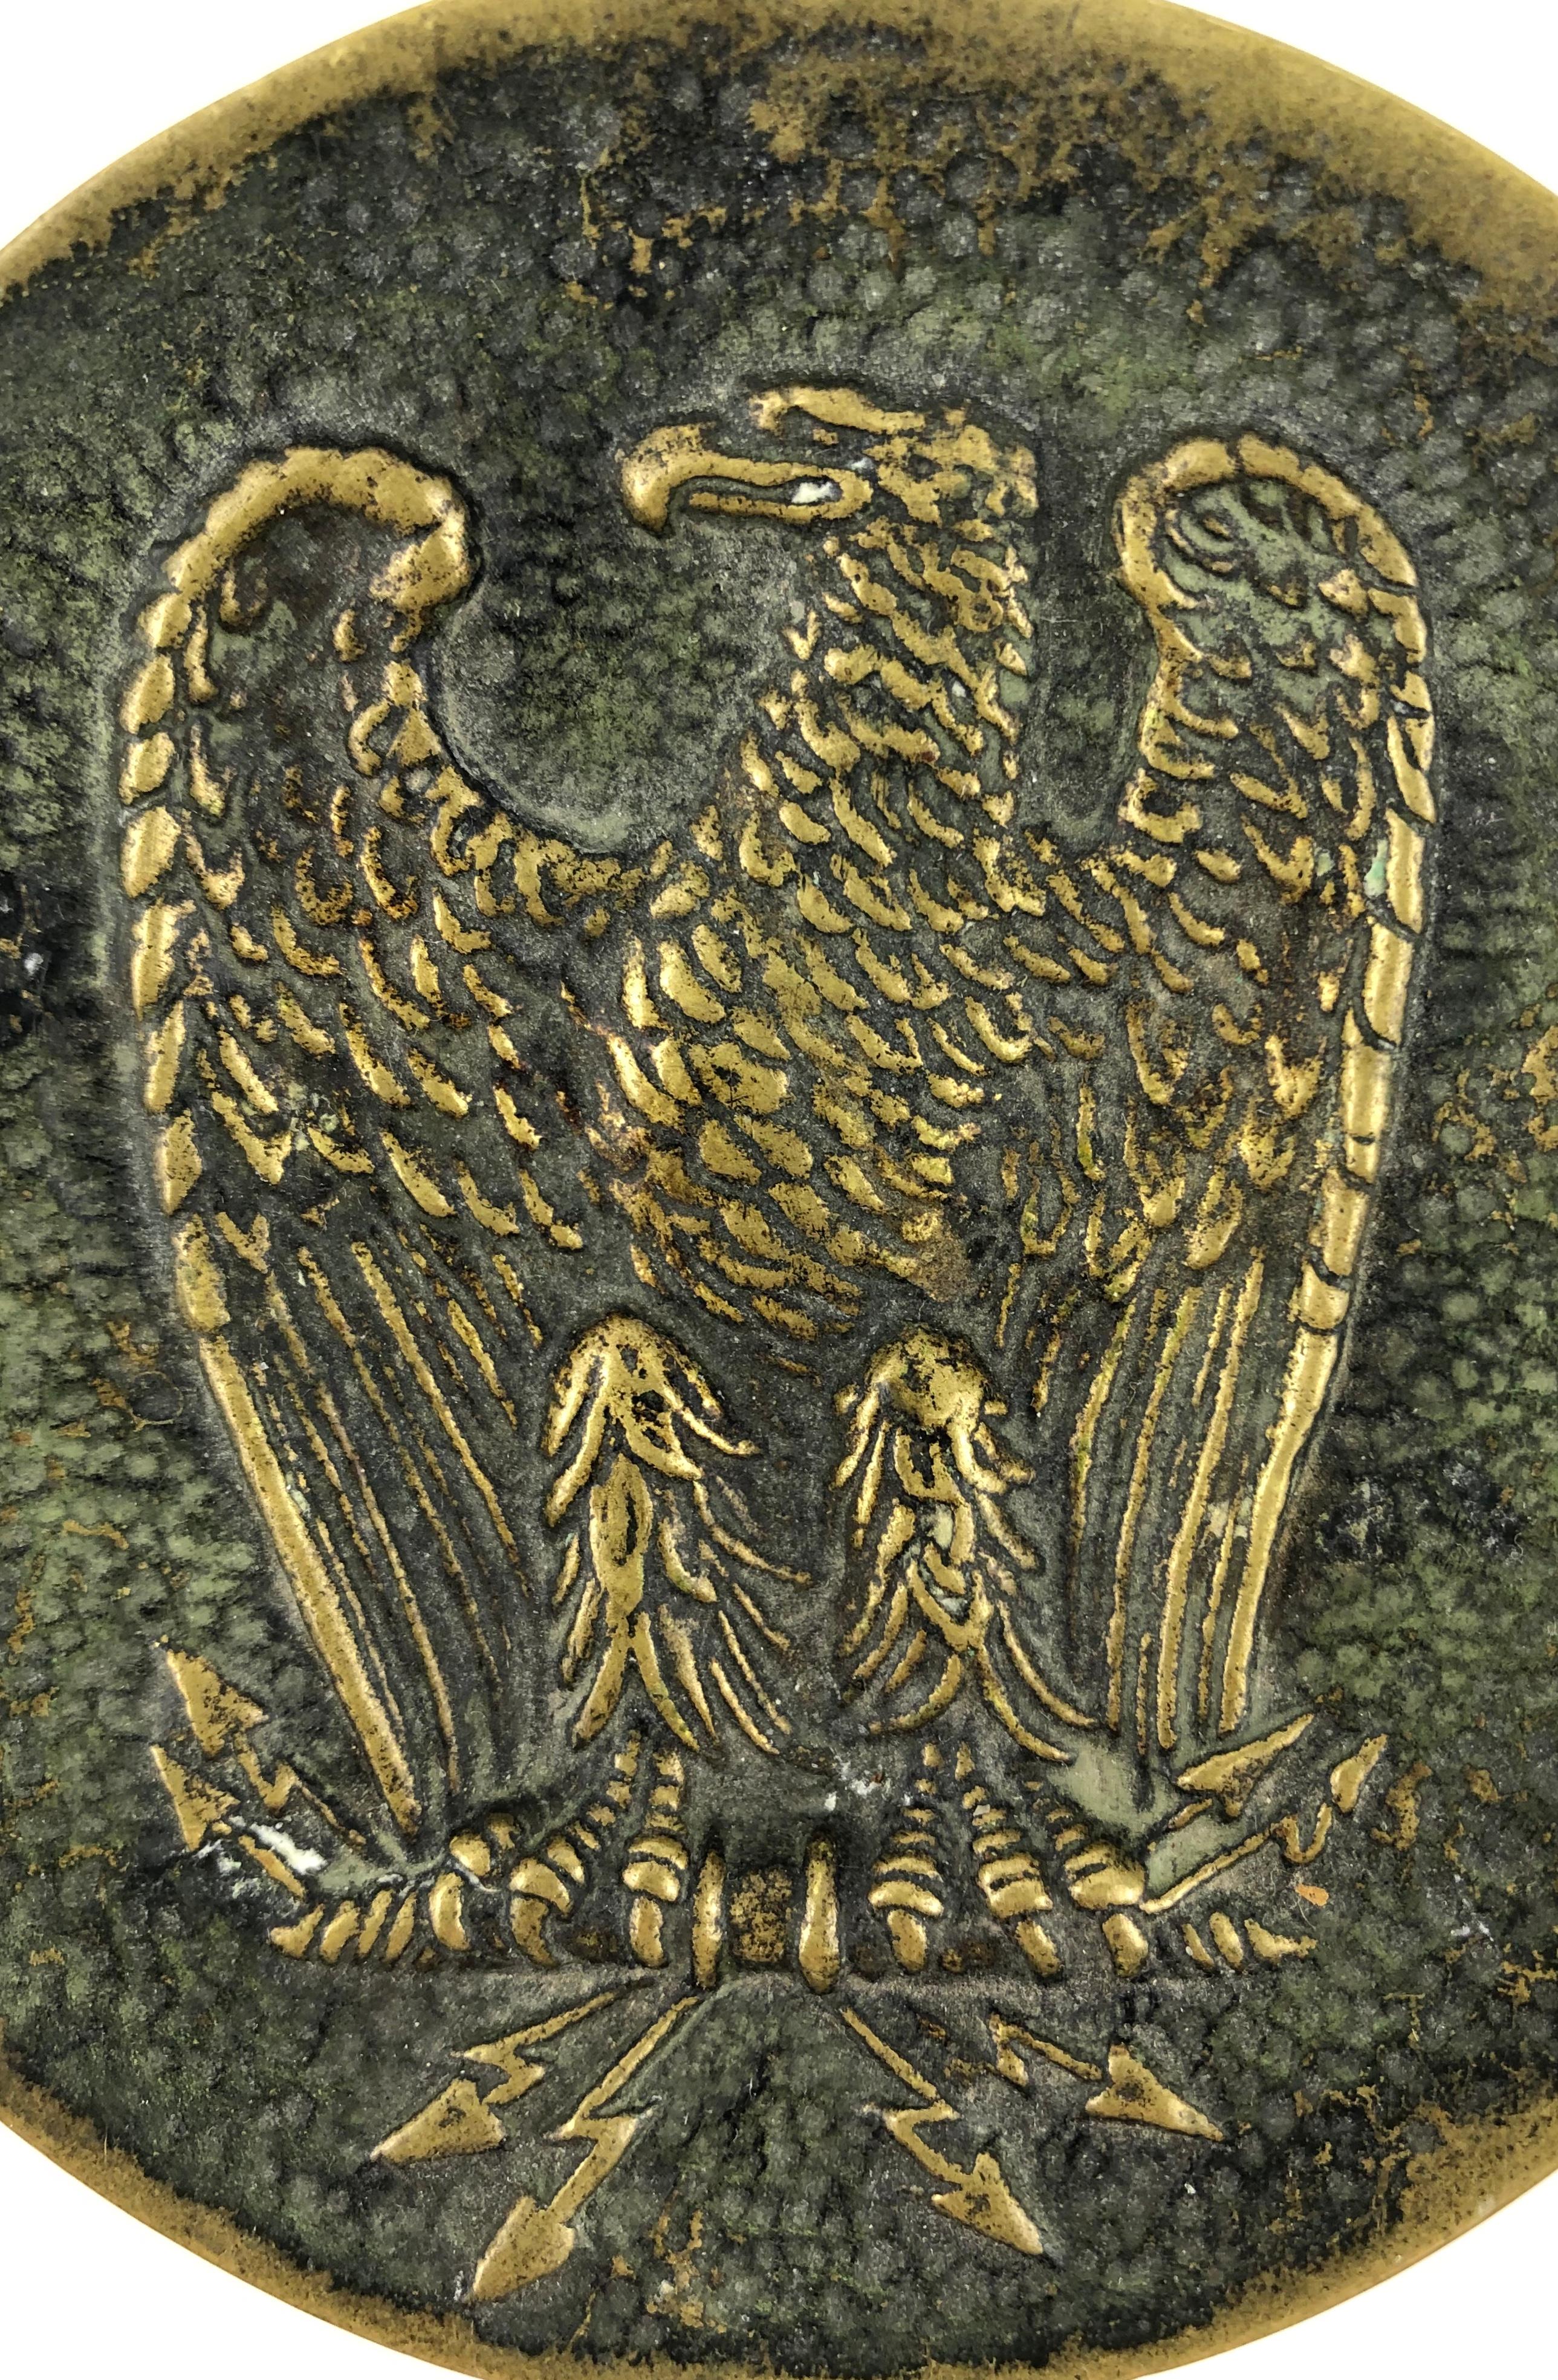 Bronze by Max Le Verrier that makes a great key holder/vide-poche. 

The Imperial Eagle motif on this heavy bronze piece is beautiful and displays very well on a desk or console near an entry. 

One of a series of bronze dishes sculpted and cast